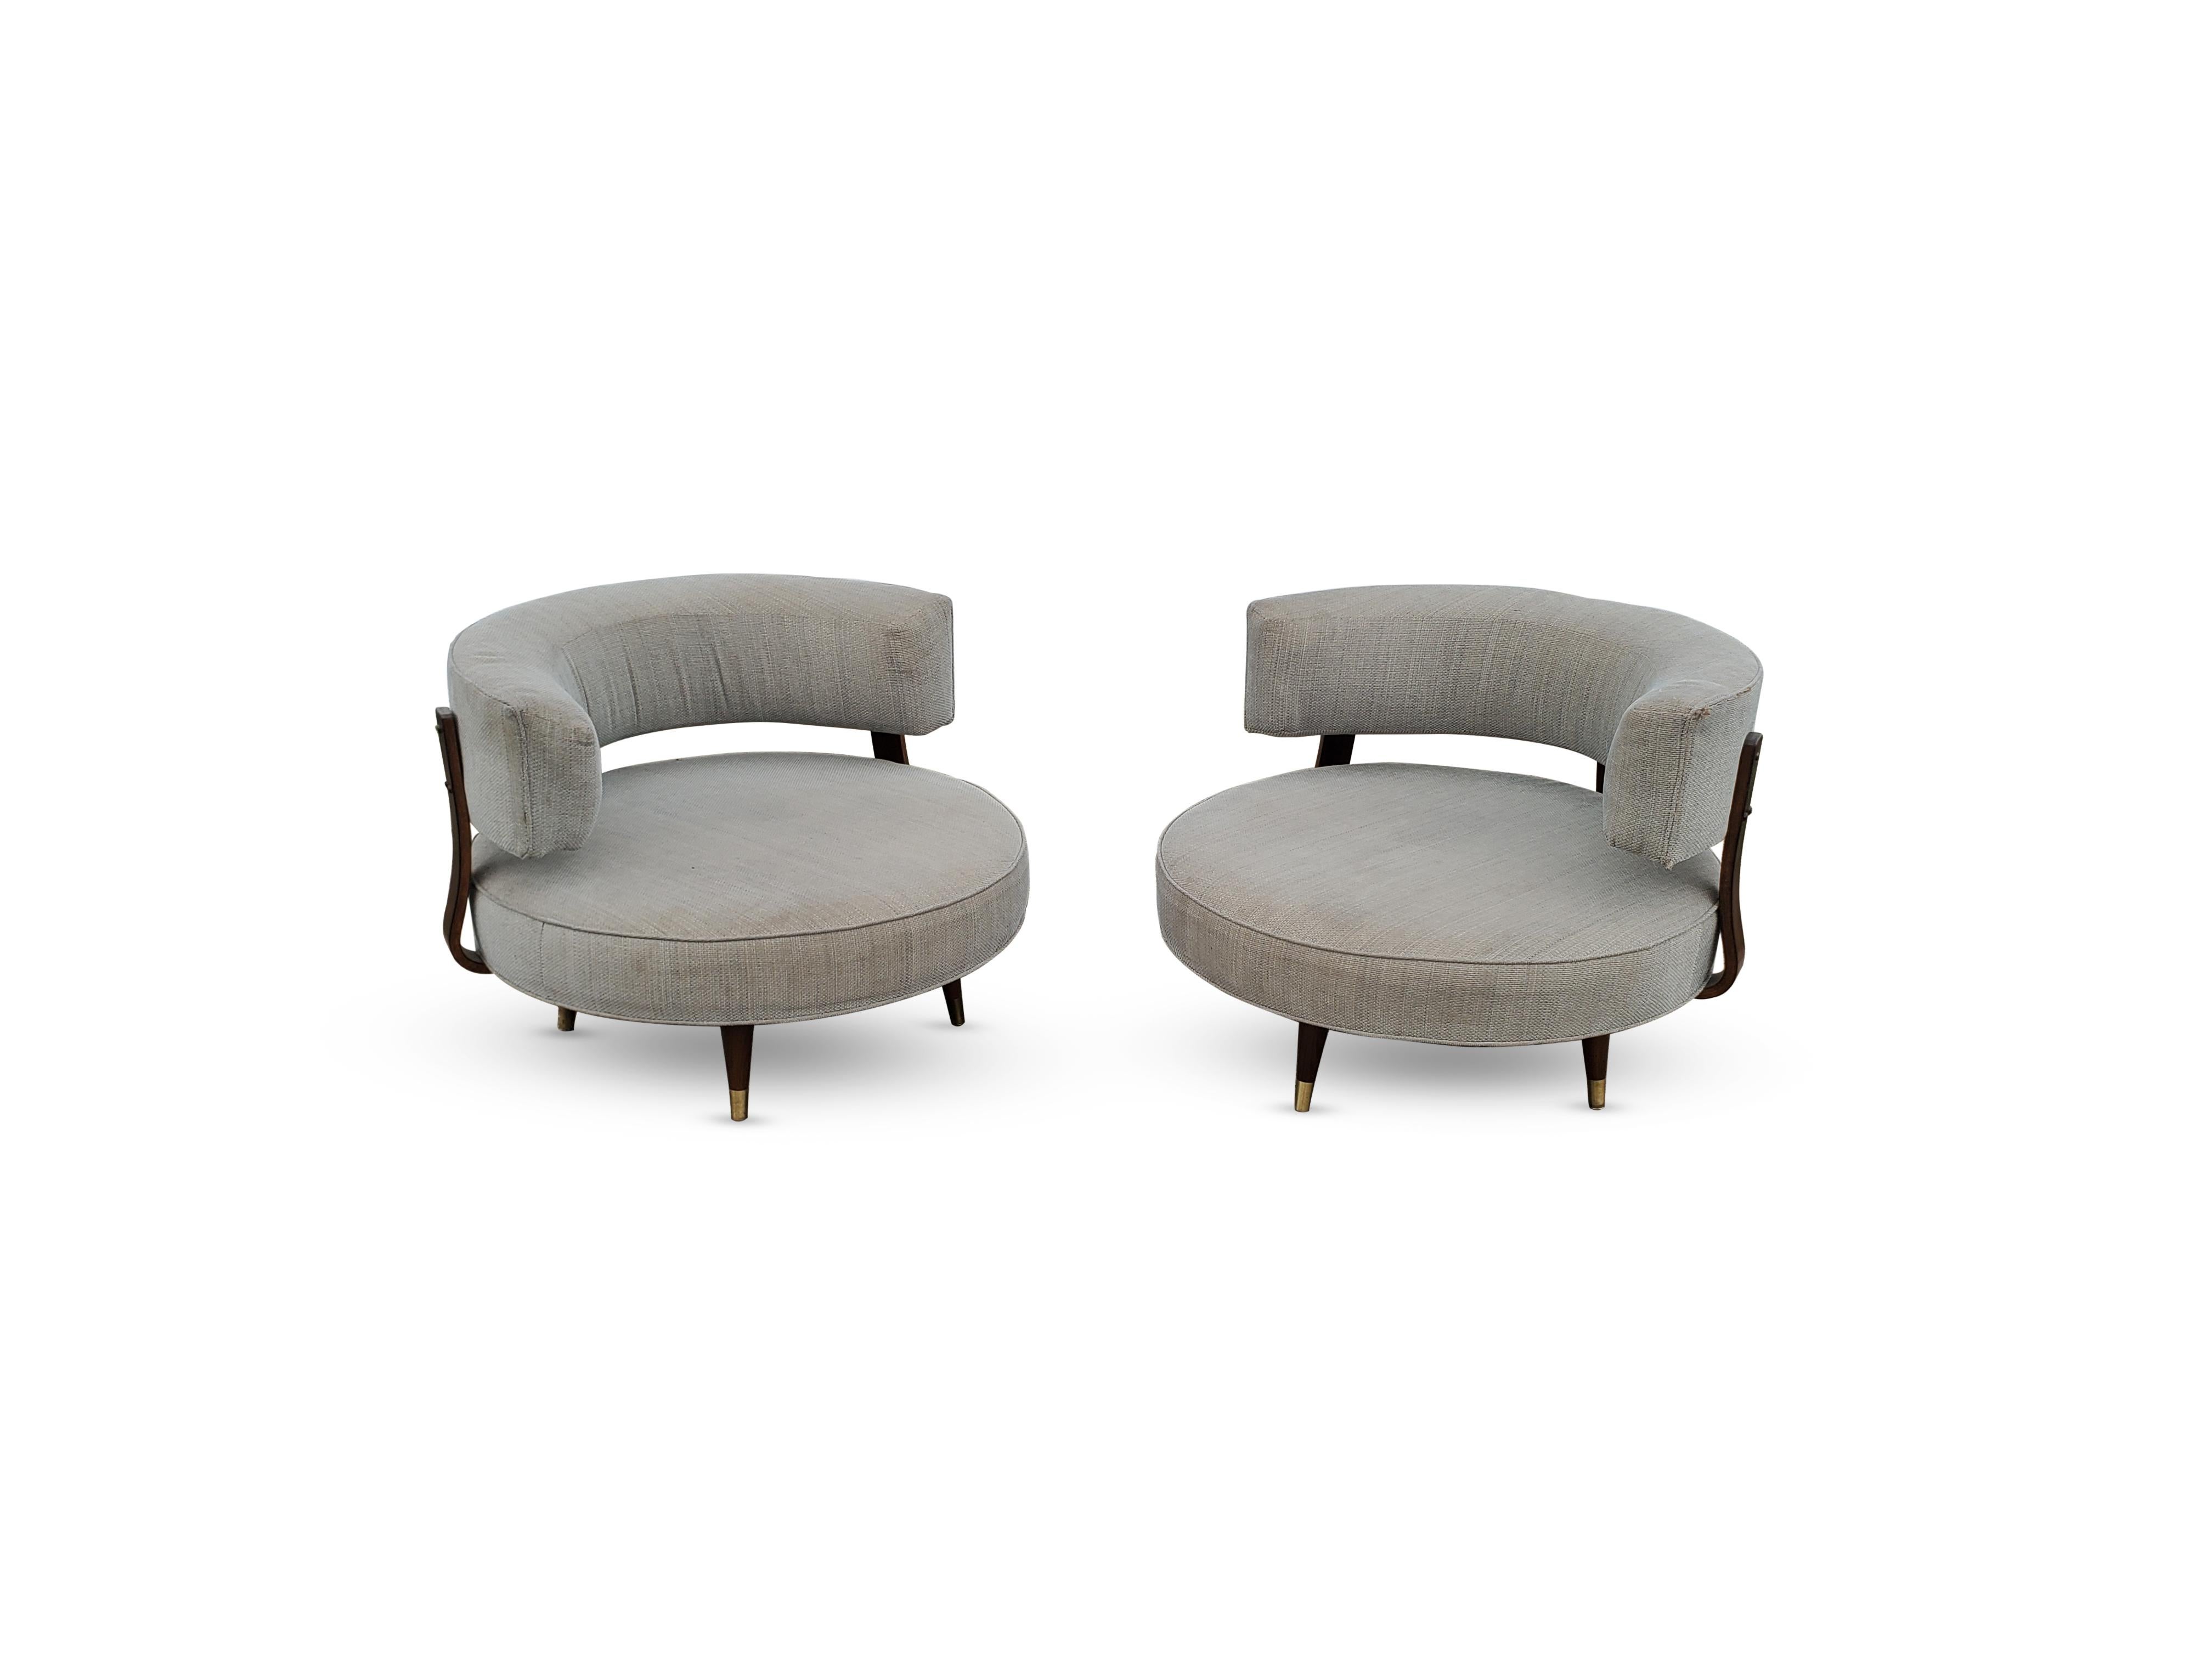 Mid-Century Modern Pair of Adrian Pearsall for Craft Associates Large Round Swivel Chairs 1426-RO